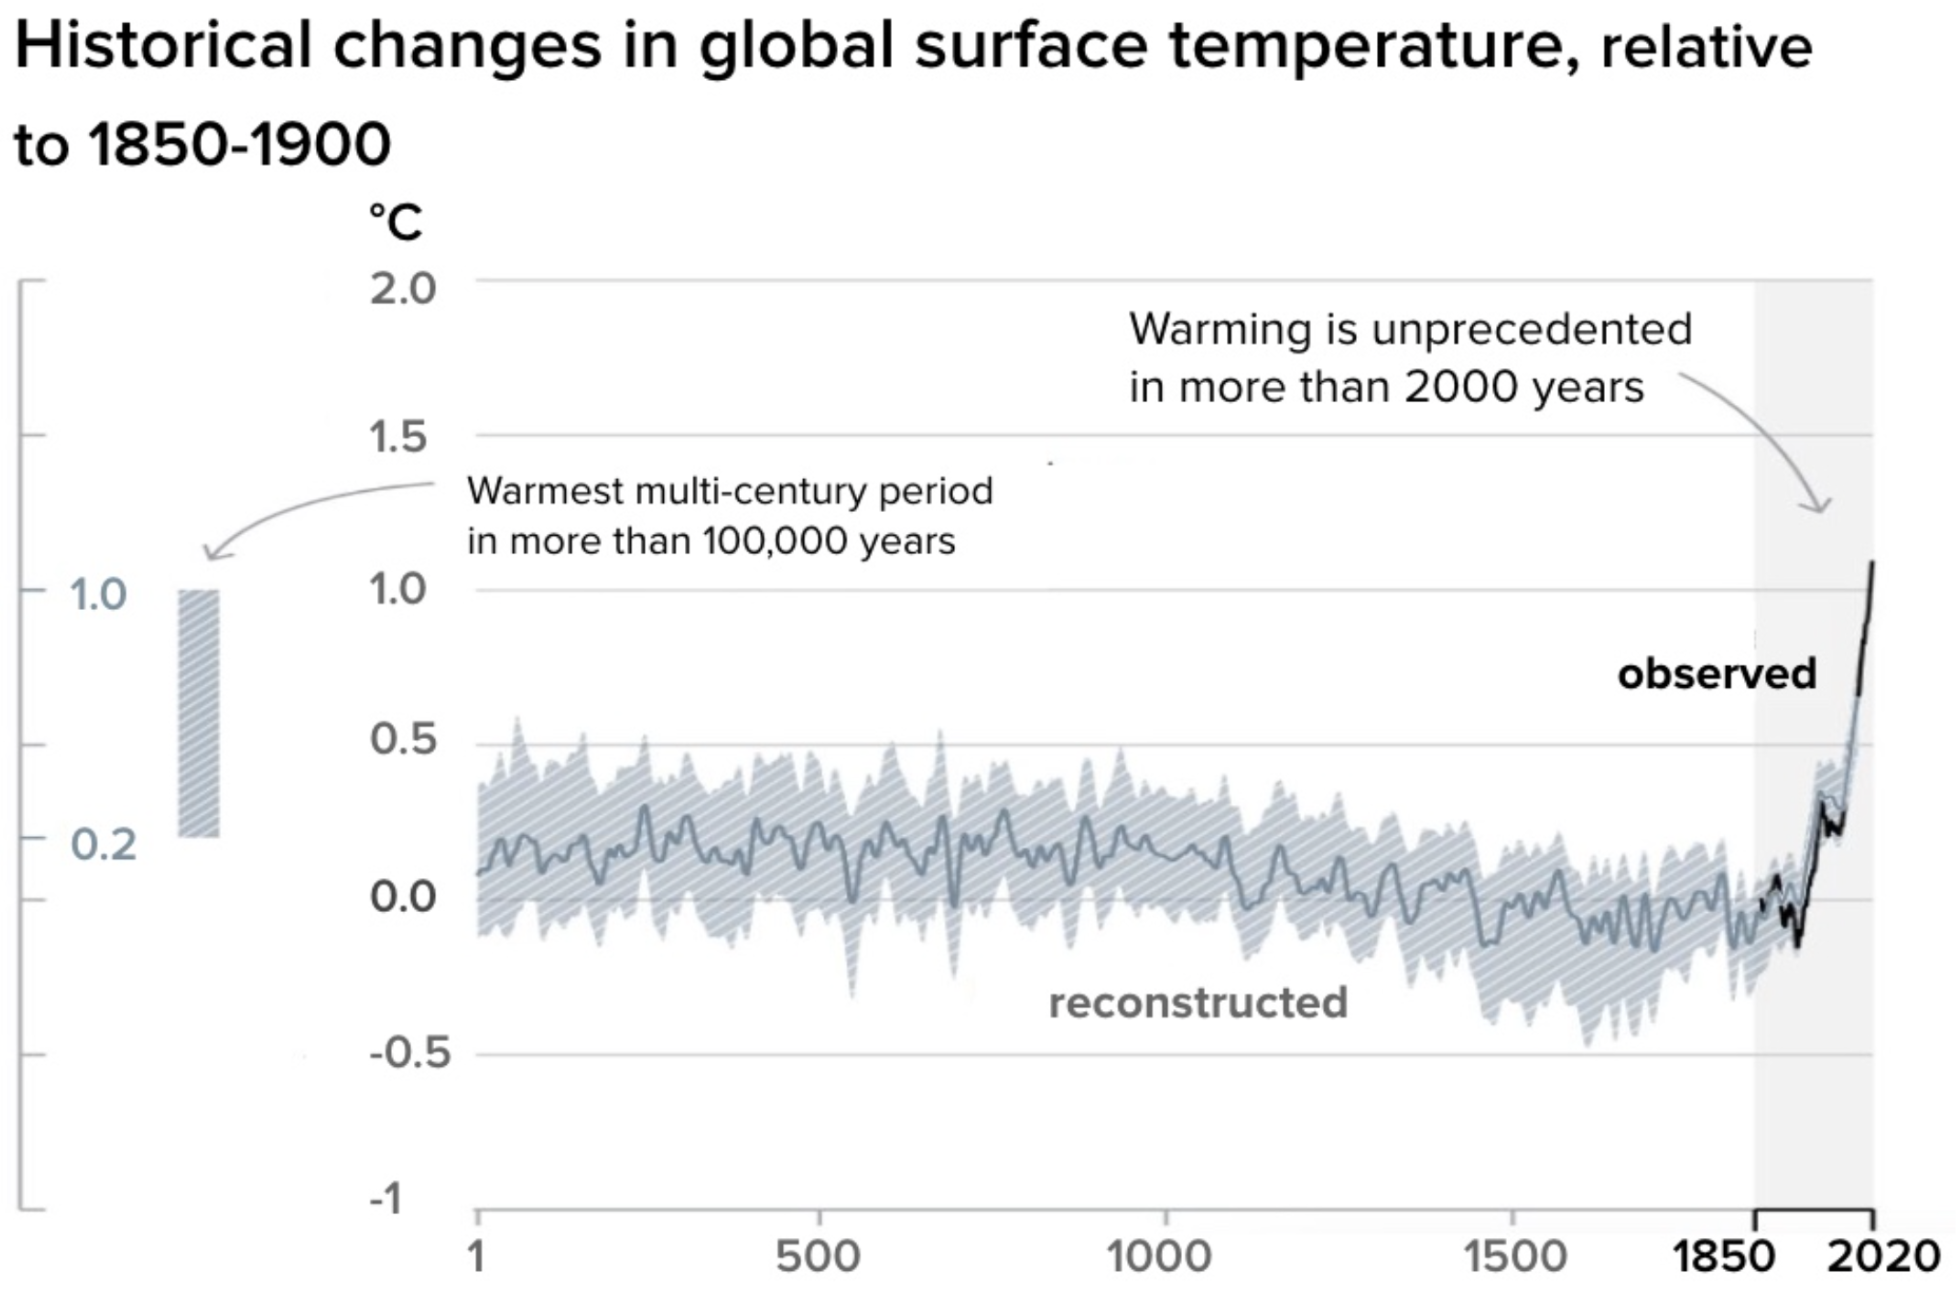 Temperature changes over the past 2000 years relative to the global mean temperature between 1850 and 1900